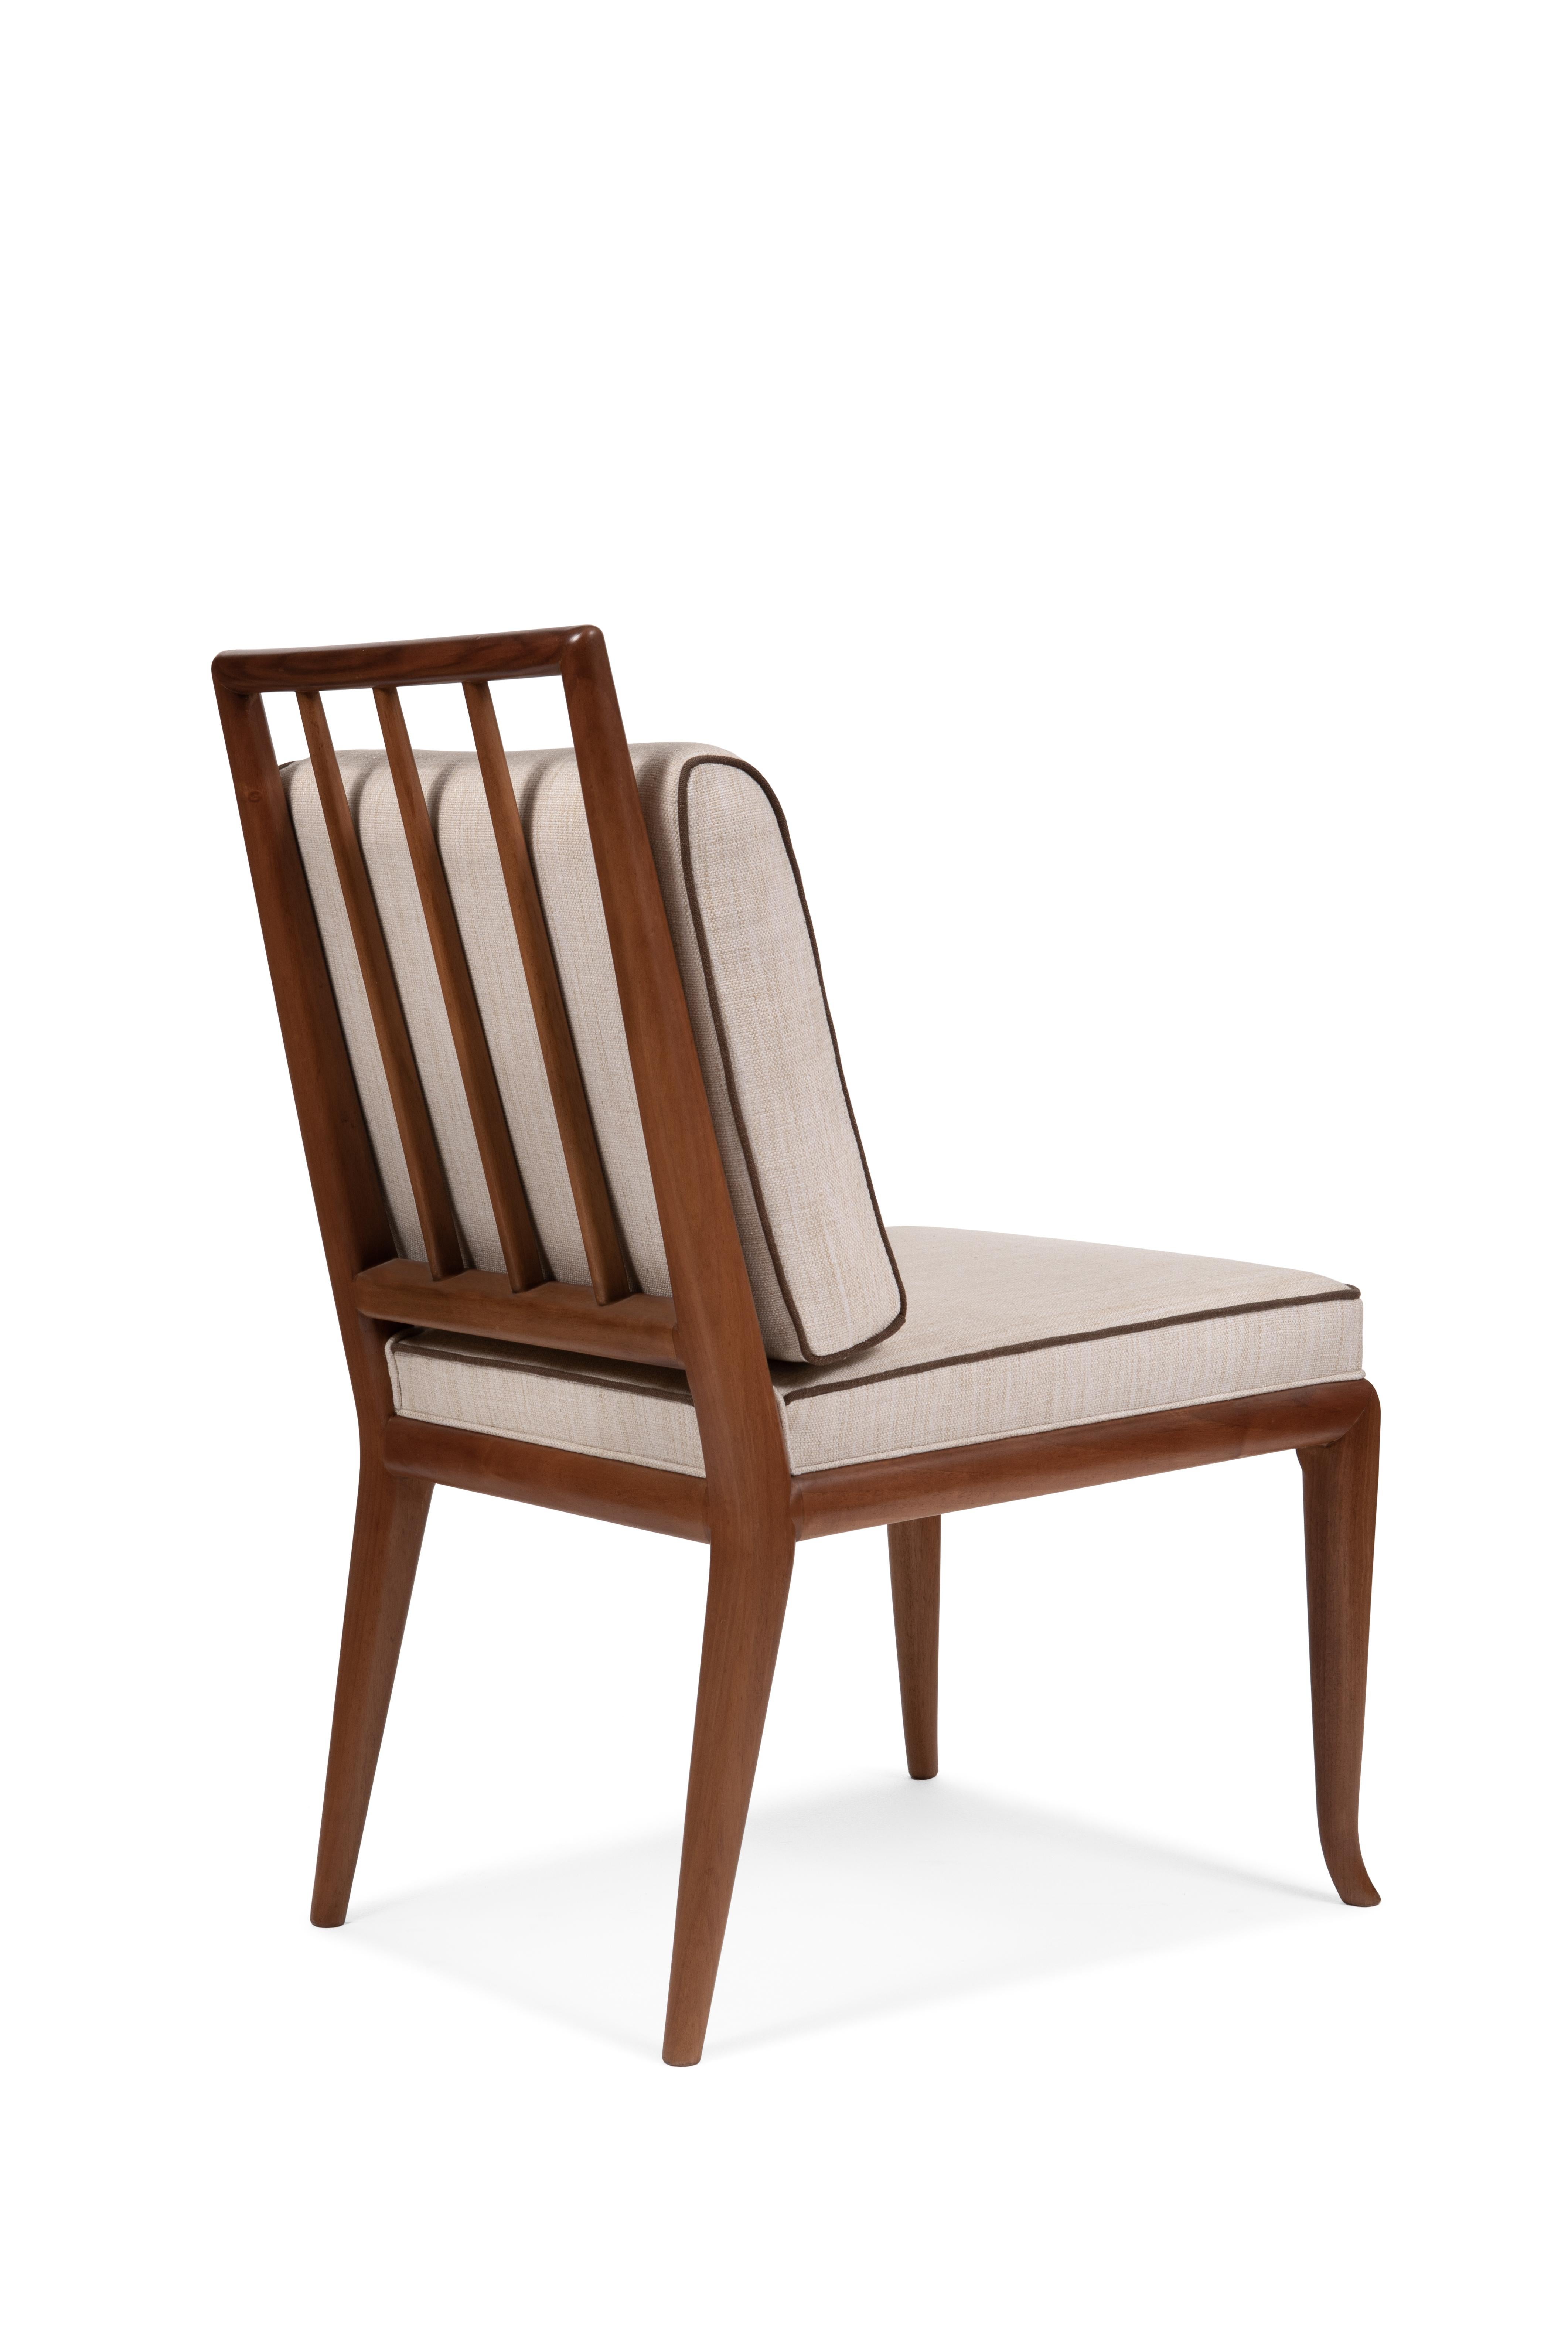 Italian Contemporary Style Walnut Frame Dining Chair, Made in Italy For Sale